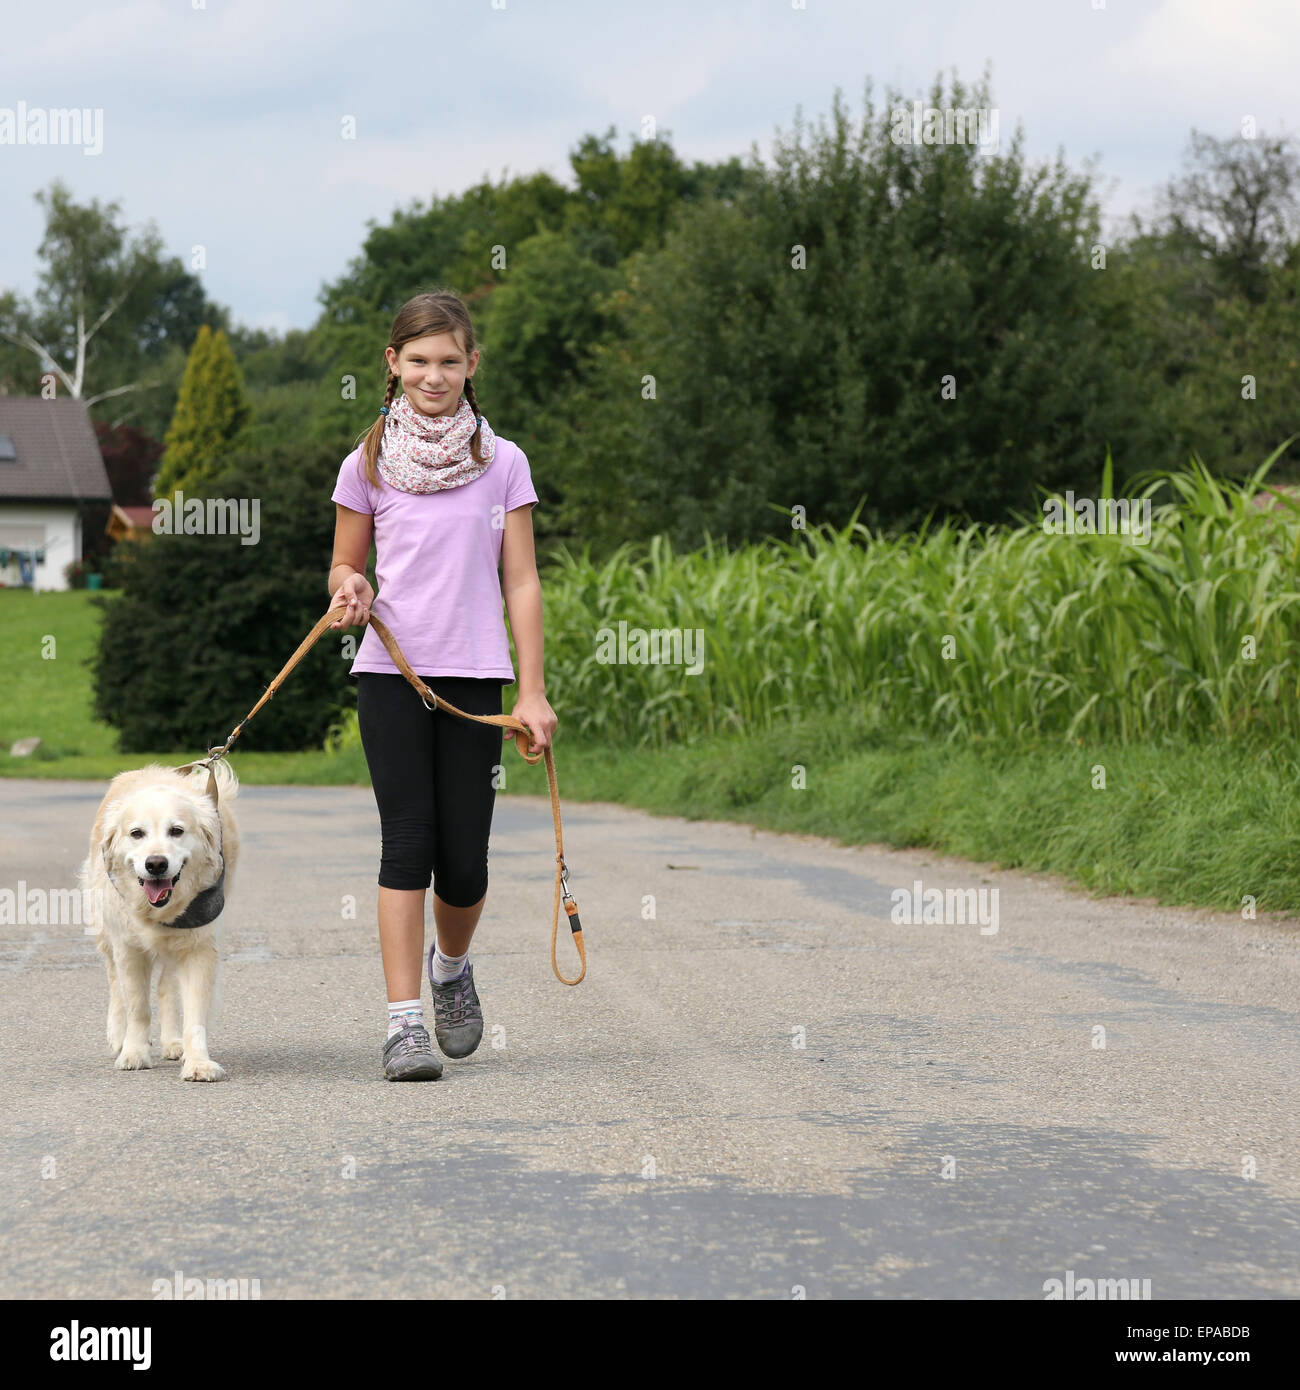 Hund Gassi High Resolution Stock Photography and Images - Alamy